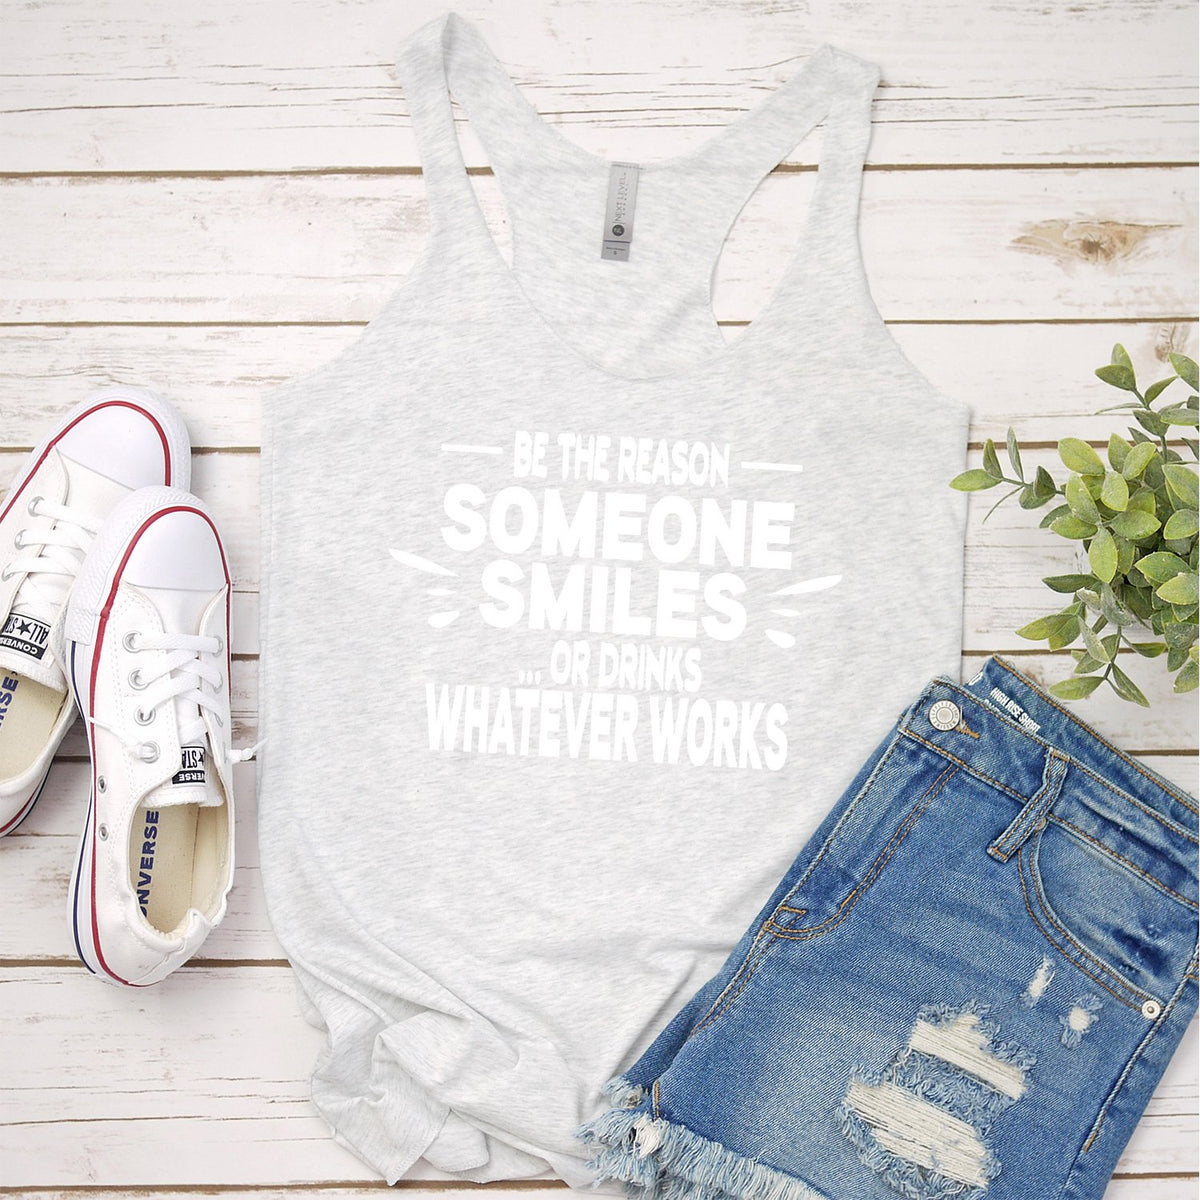 Be The Reason Someone Smiles Or Drinks Whatever Works - Tank Top Racerback